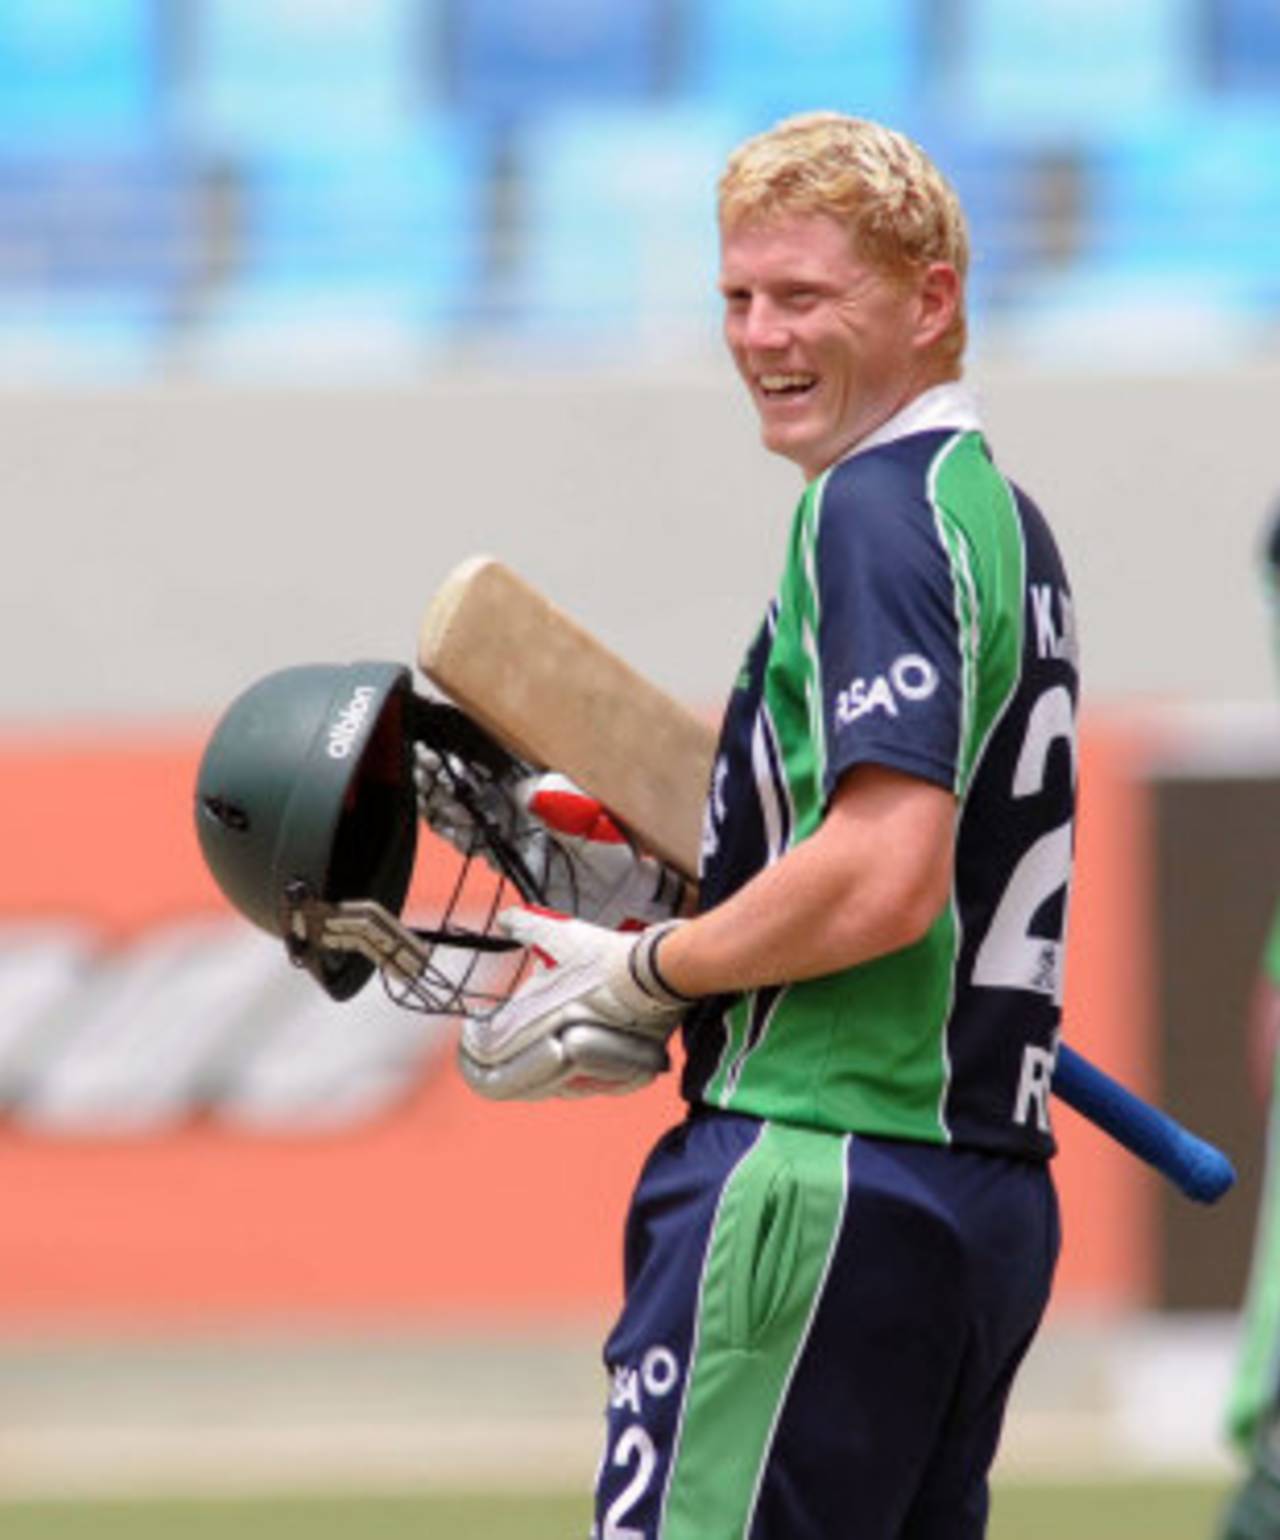 Kevin O'Brien will captain Ireland in the Intercontinental cup match with Afghanistan&nbsp;&nbsp;&bull;&nbsp;&nbsp;ICC/Ian Jacobs